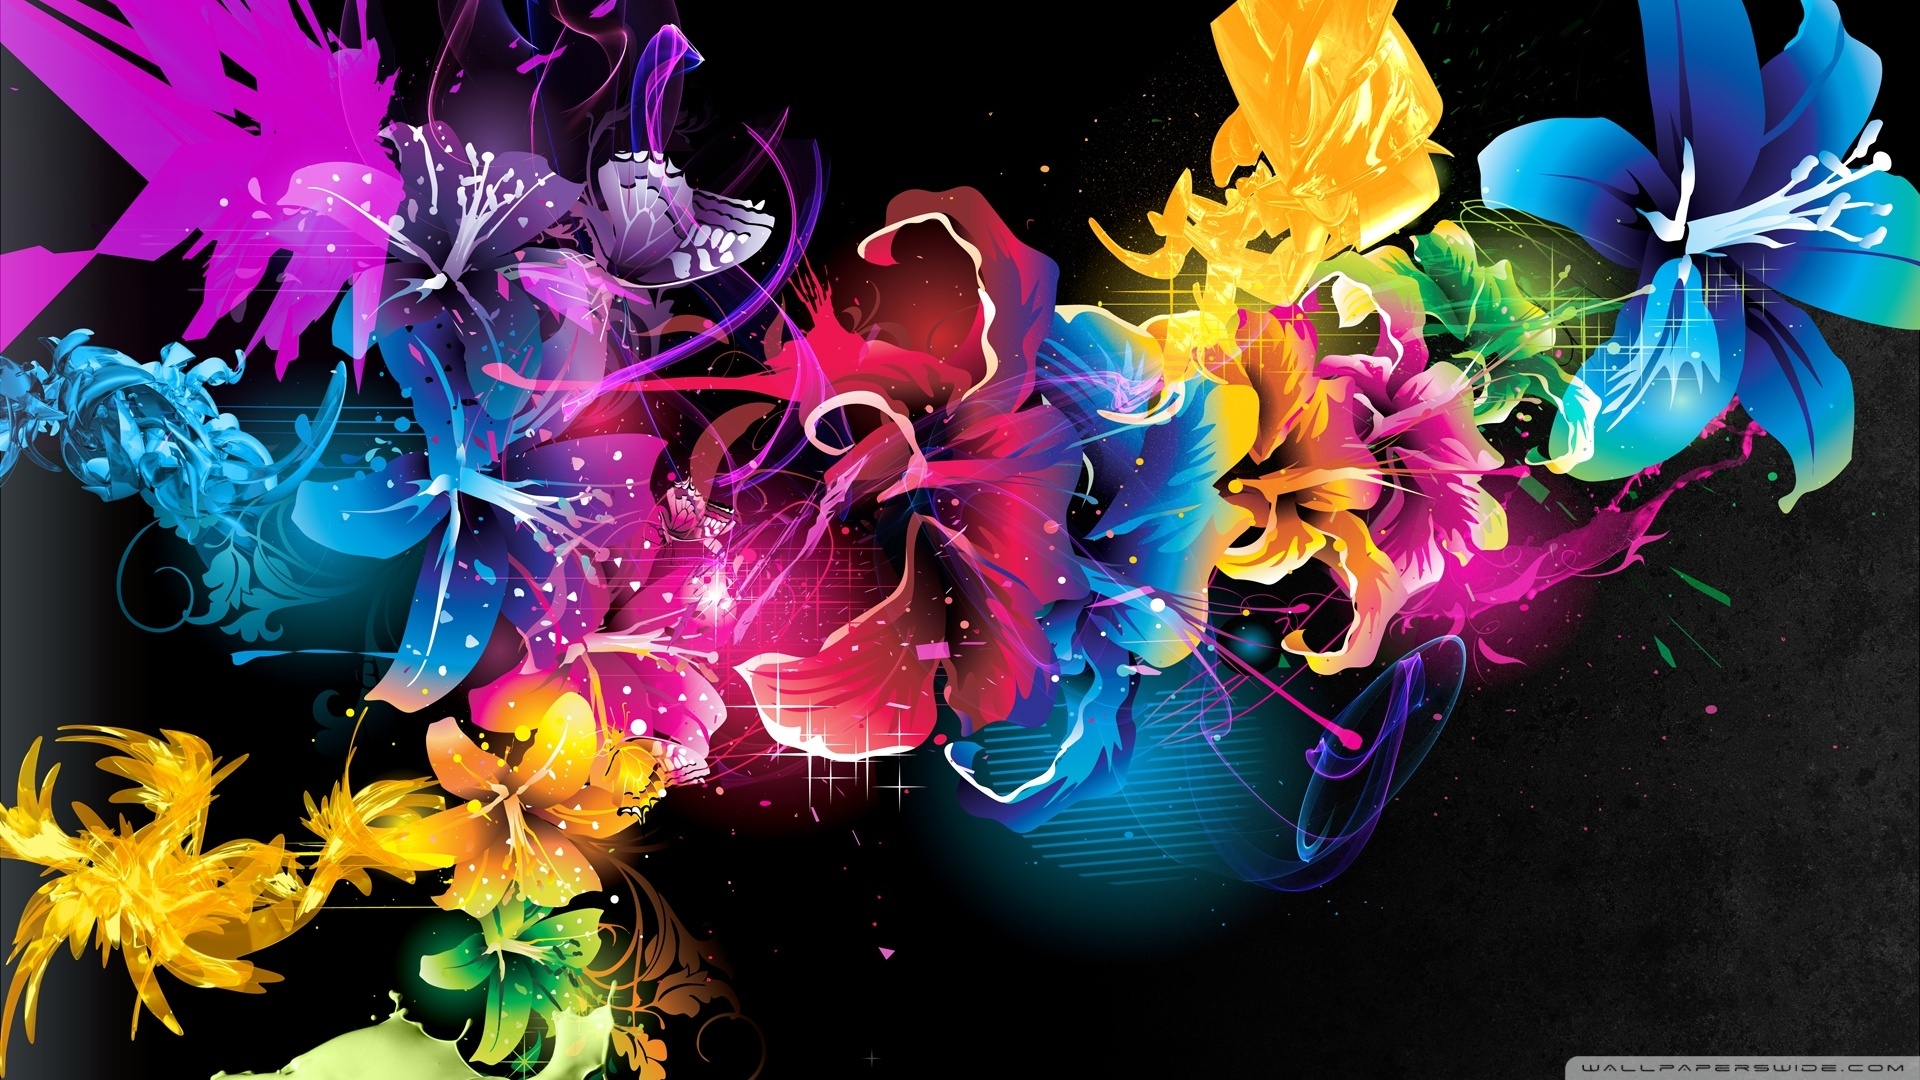 Colorful Flowers 8 Wallpaper 1920x1080 Colorful Flowers 8